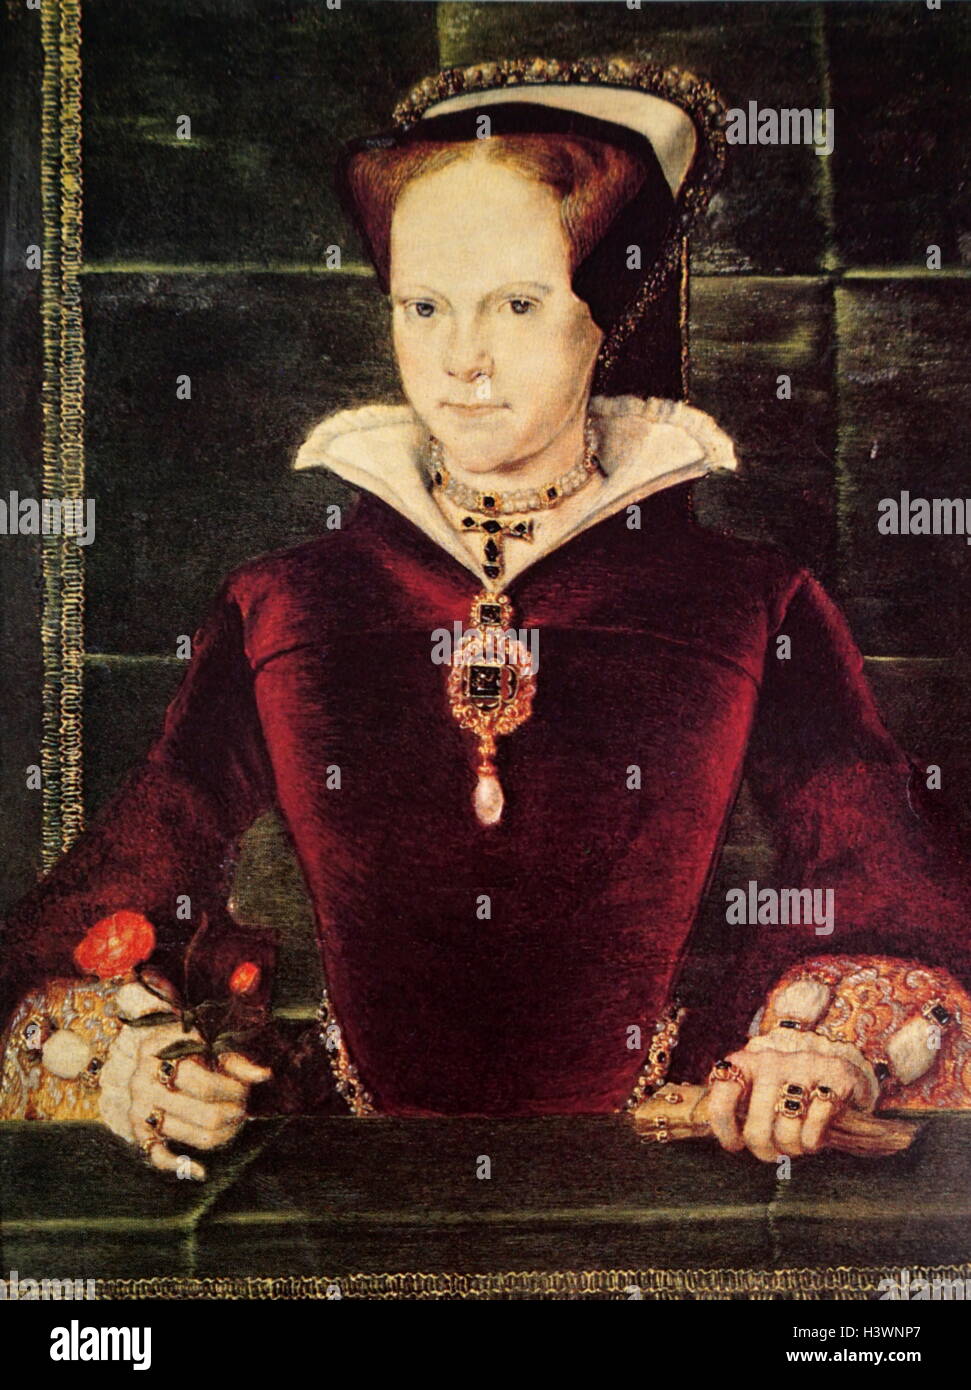 Portrait of Mary I of England (1516-1558) Her executions of Protestants led to the posthumous sobriquet 'Bloody Mary'. Dated 16th Century Stock Photo